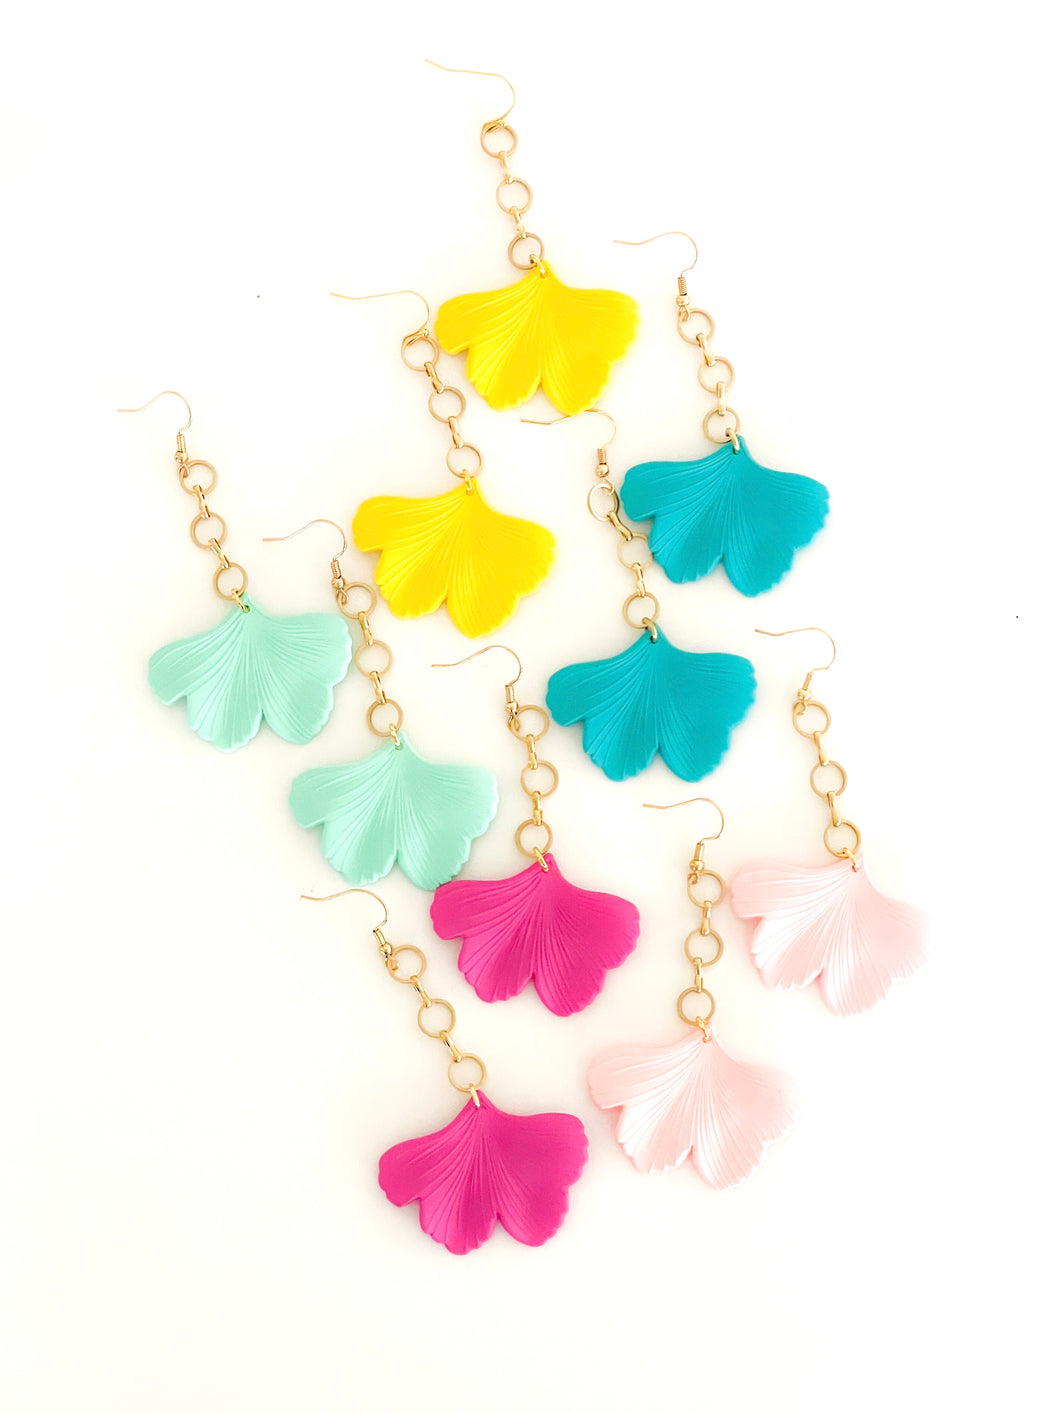 The Spring Ginkgo & Chain Earrings